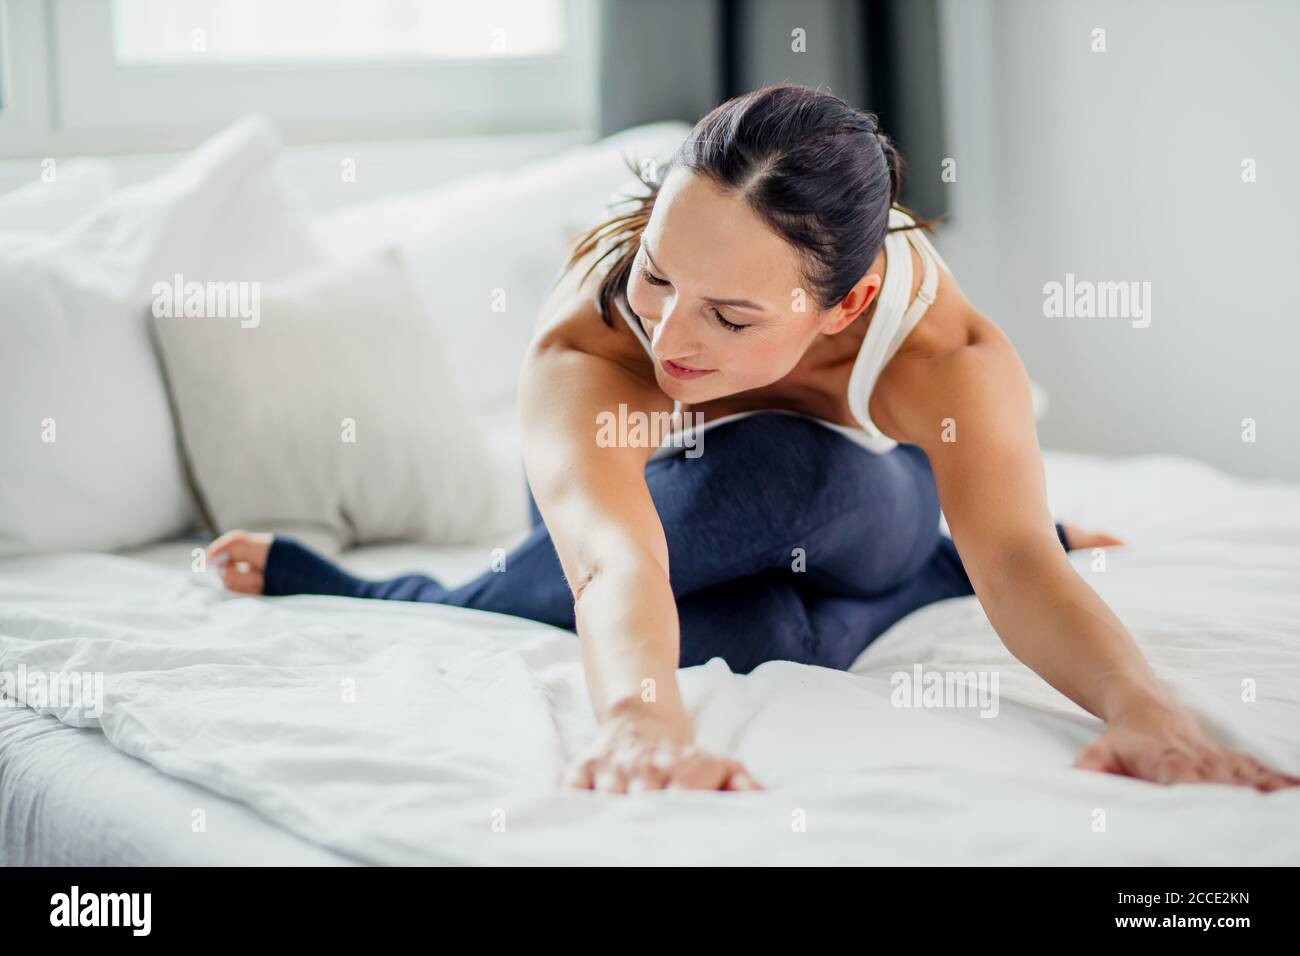 sport and healthy lifestyle concept. young flexible woman do exercises at home, every morning begins from stretching and fitness, wellbeing Stock Photo